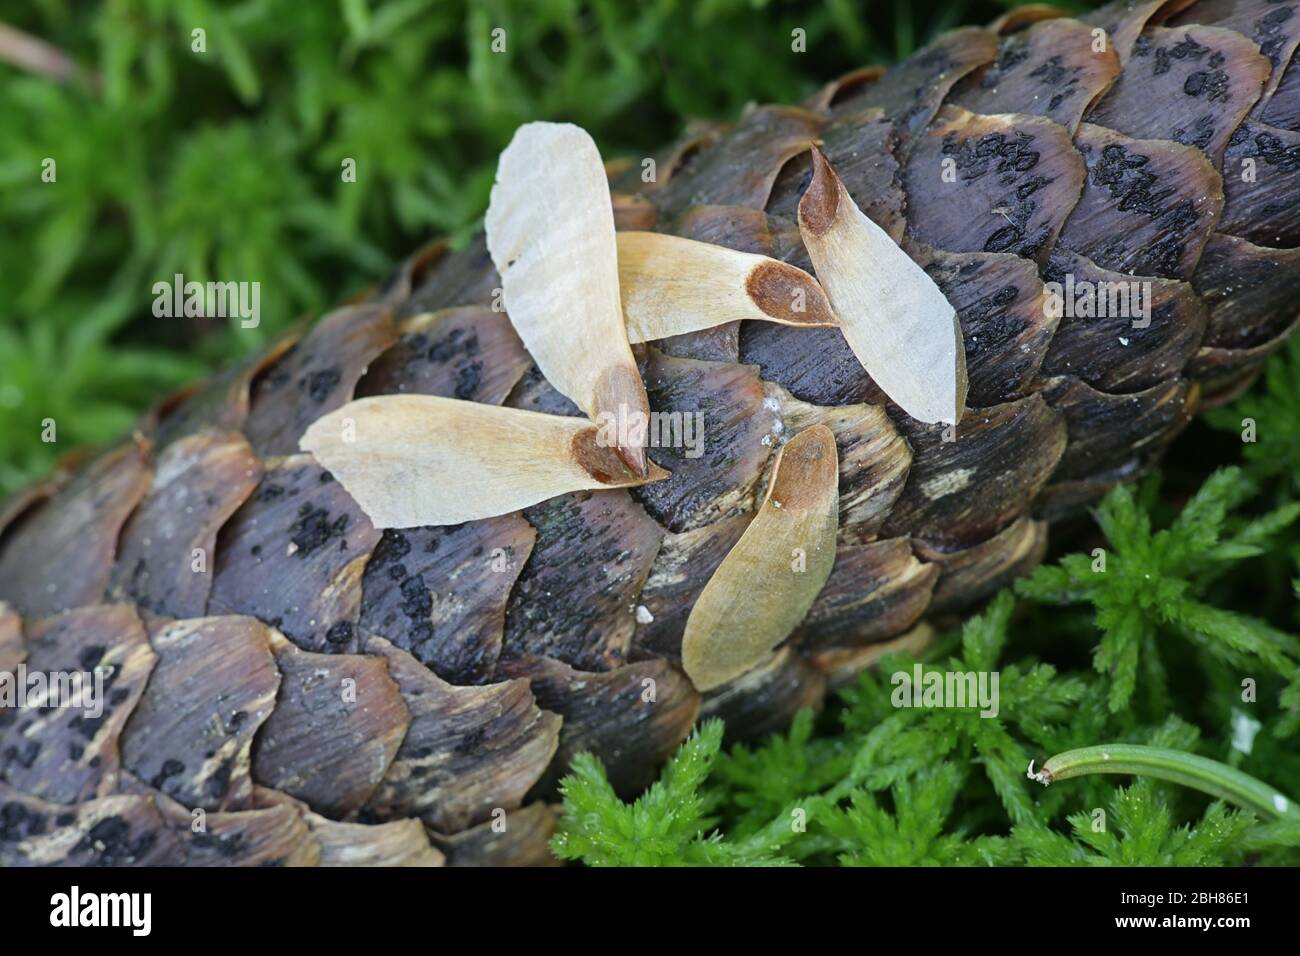 Seeds of Norway spruce, Picea abies, on top of a spruce cone, photographed in April Stock Photo